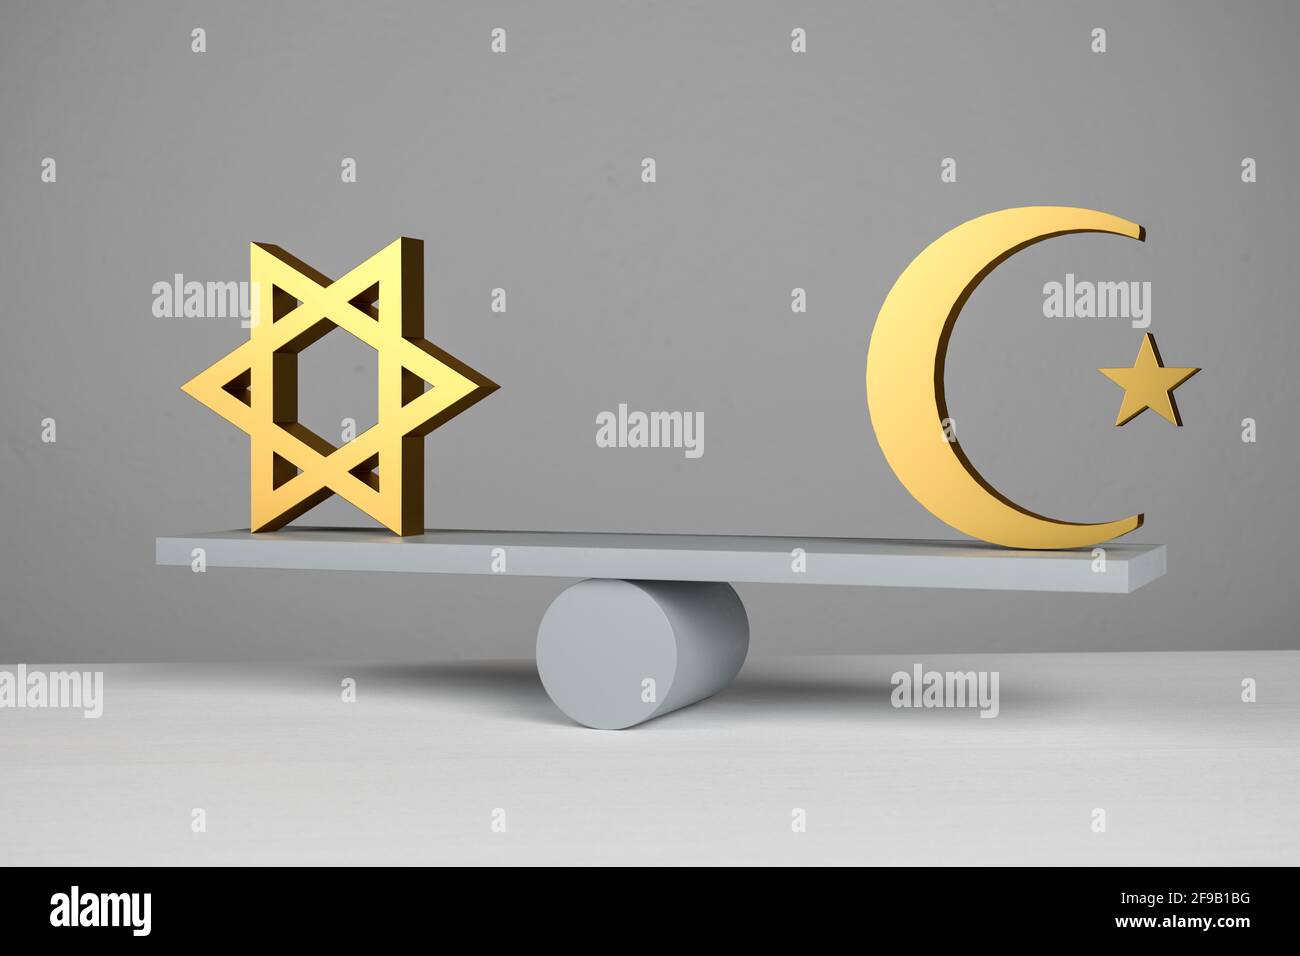 Equal rights concept: Equality of rligions. A jewish star of david and an islamic star and crescent symbol on a seesaw / scale Stock Photo